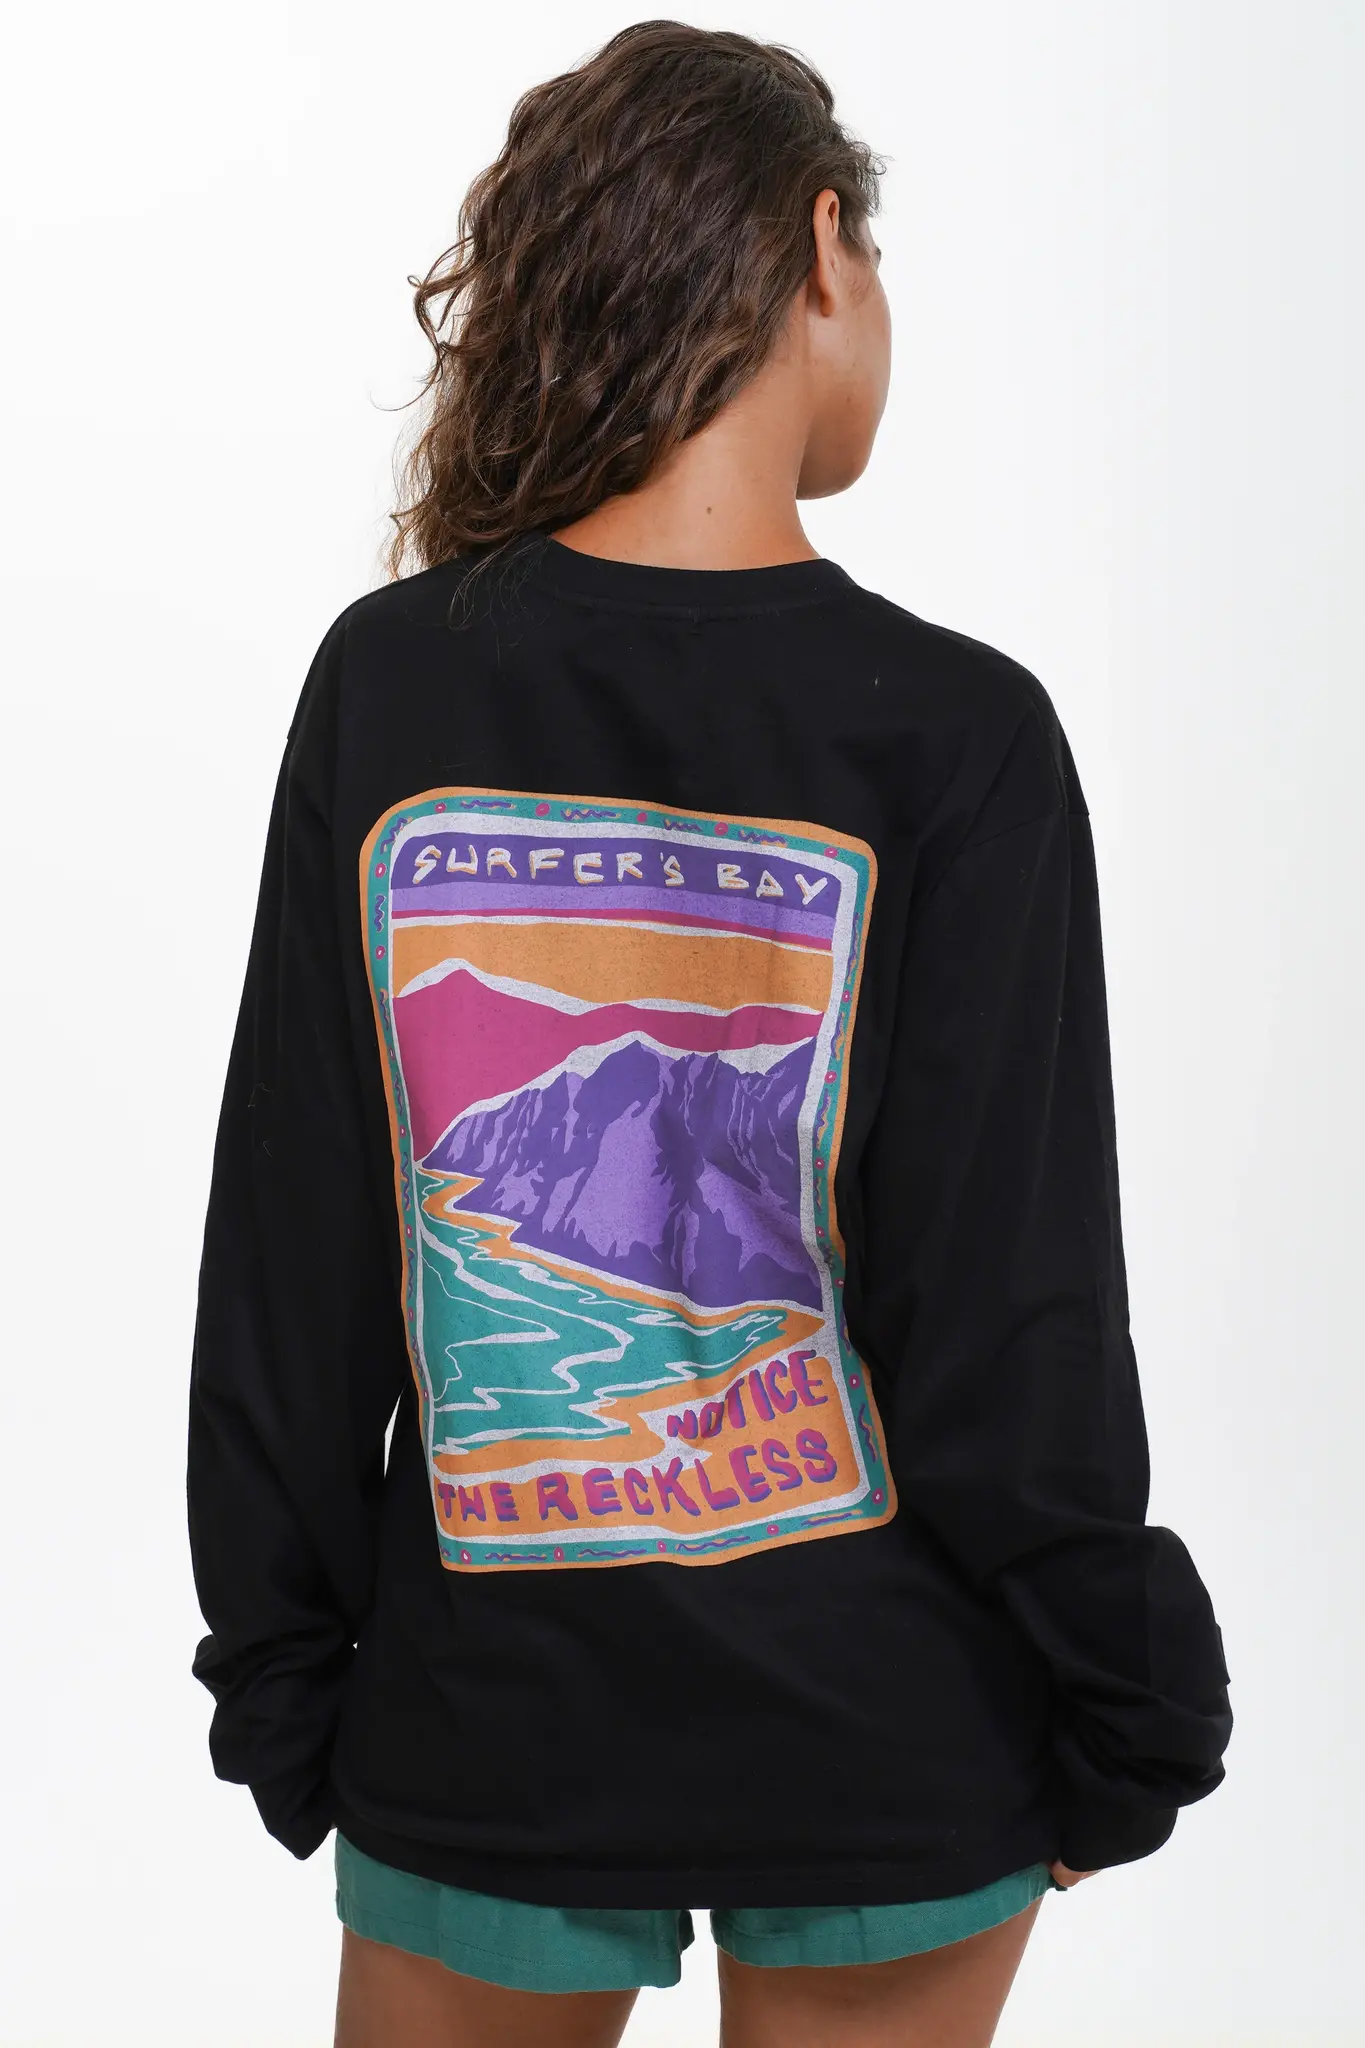 Notice The Reckless. Notice the Reckless Surfer's Bay Longsleeve Tee